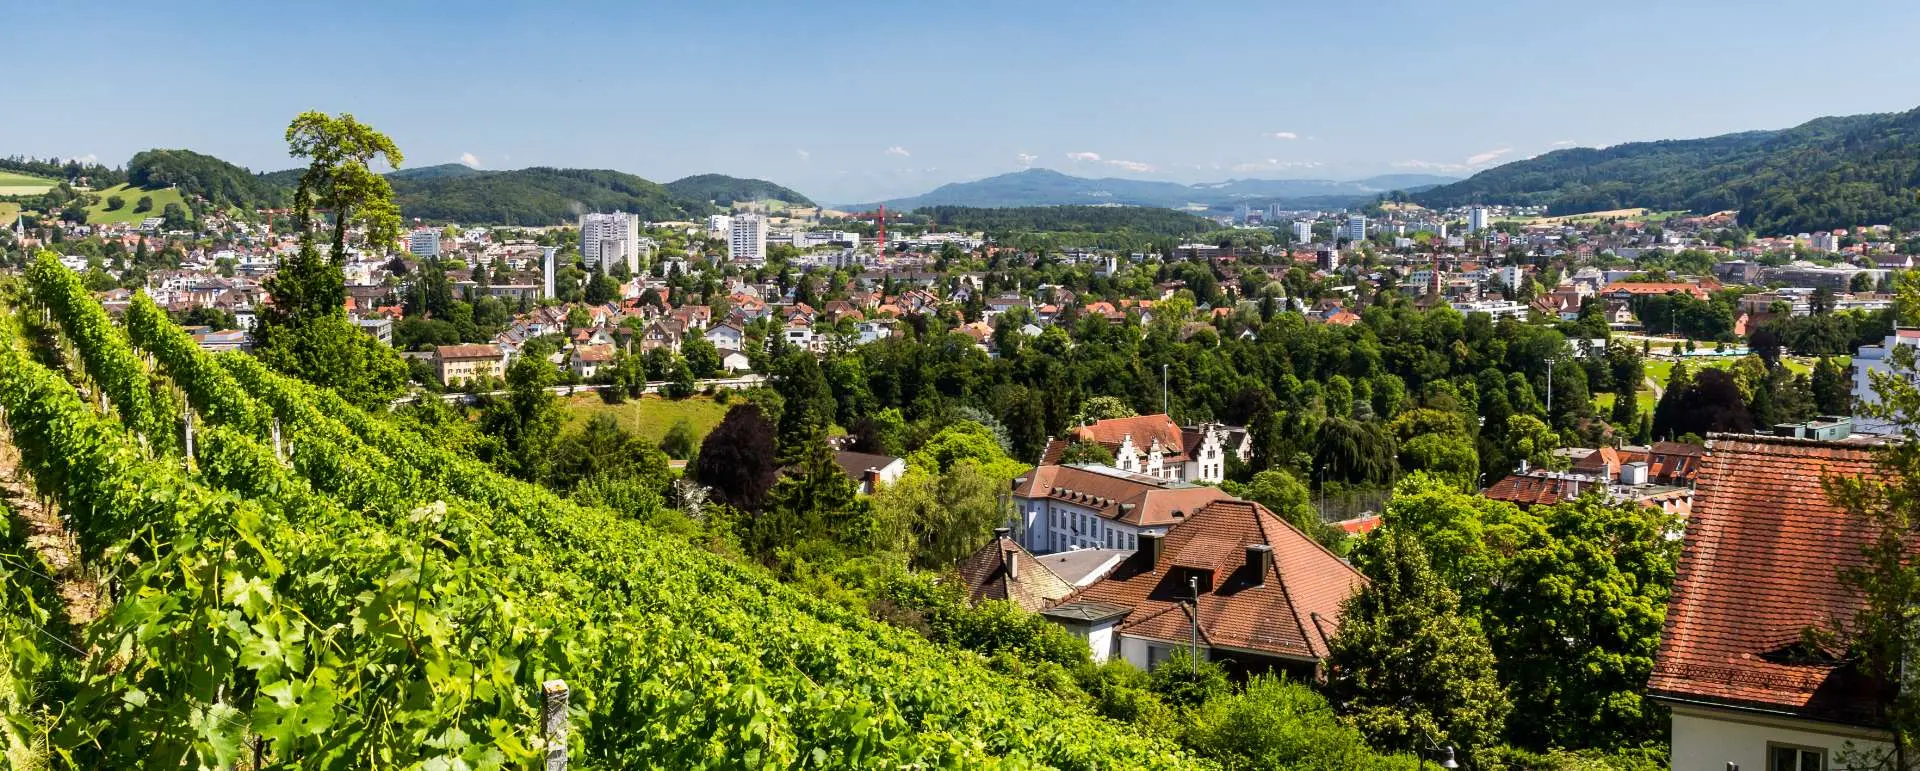 Aargau - the destination for group hotel for yoga retreats